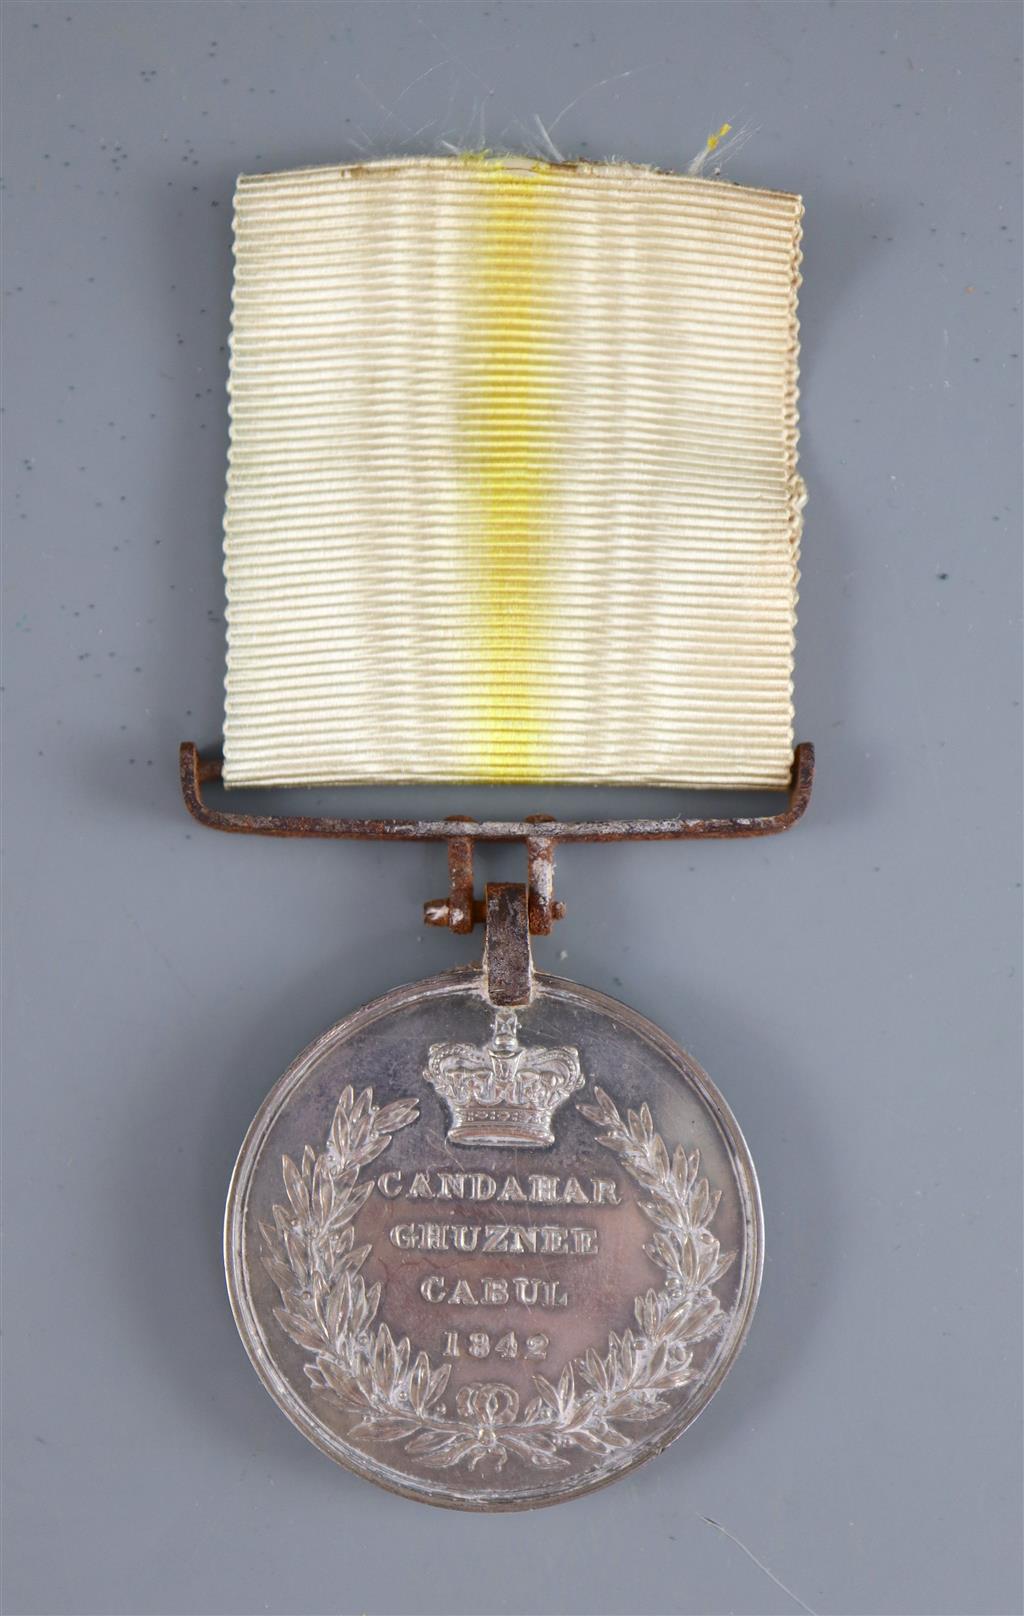 A Victorian Candahar Ghuznee Cabul medal to Assistant-Surgeon Edward Rotheram Cardew, 27th Bengal NI,